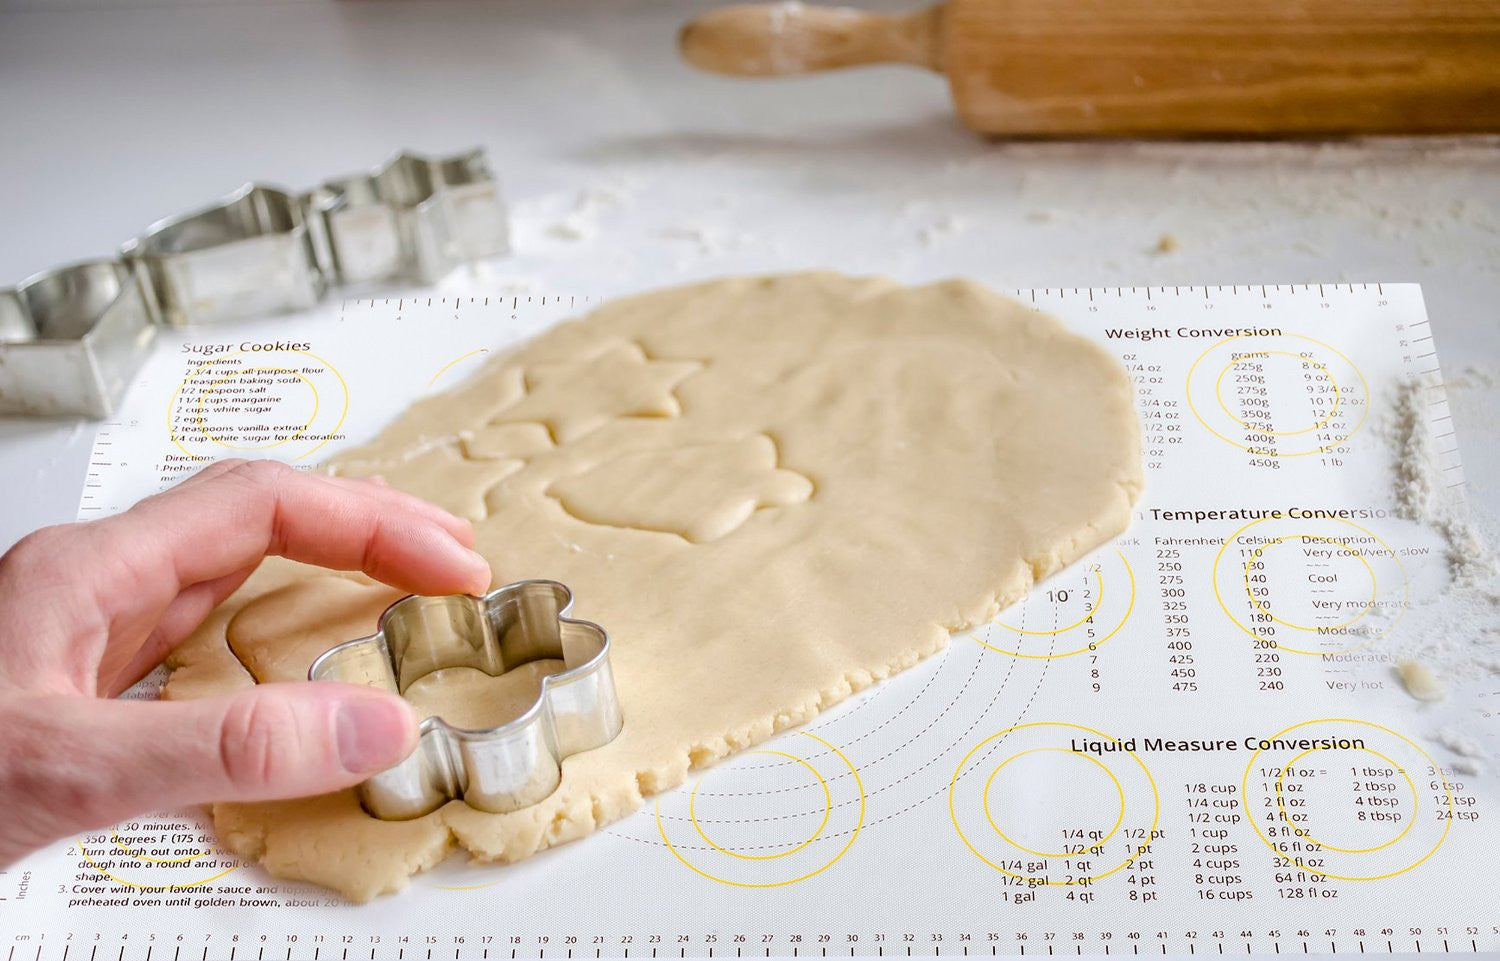 Silicone Pastry Mat with Measurements and Recipes, 14.9 x 23.3"